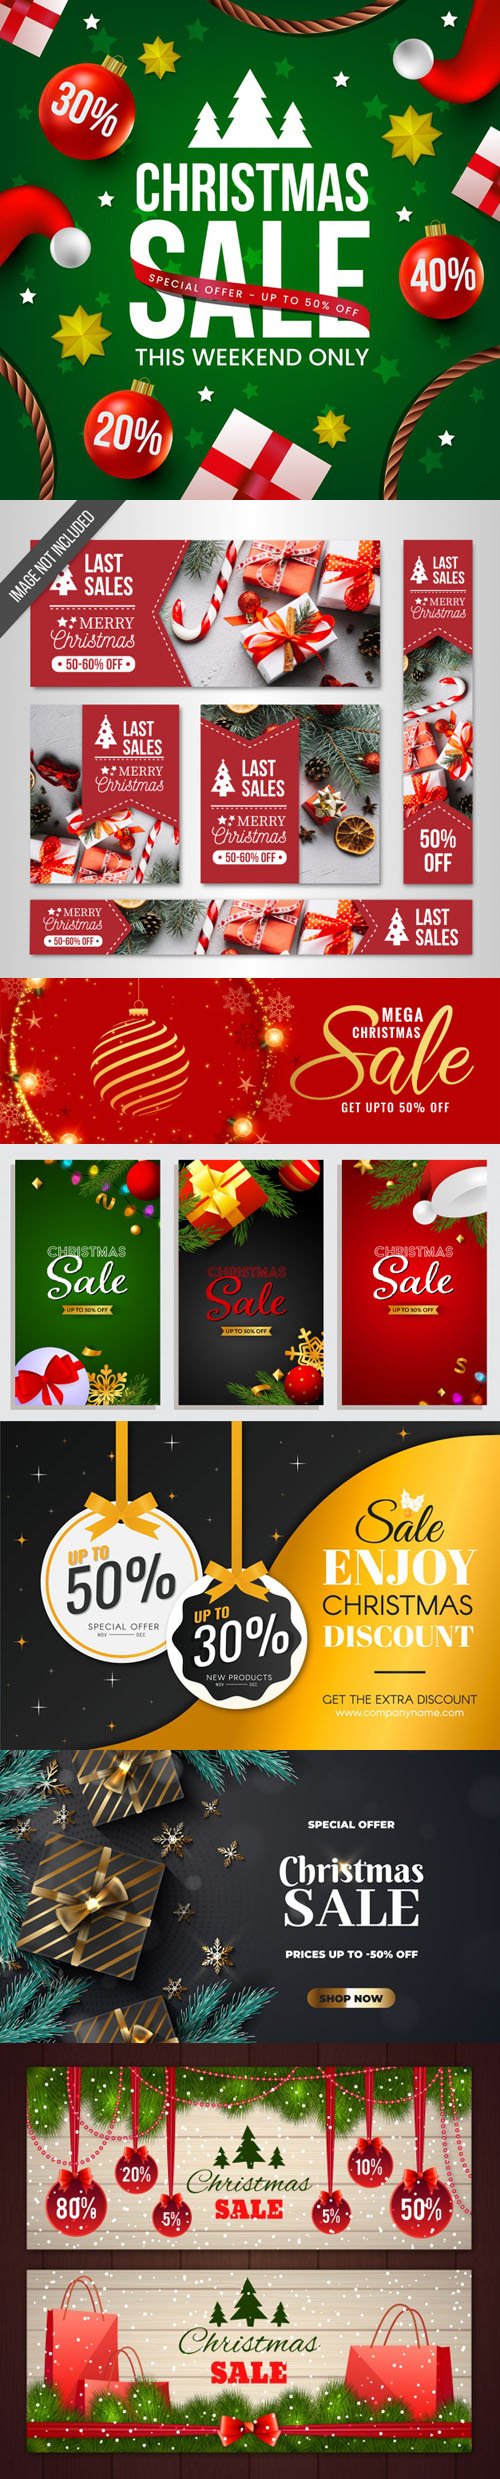 Holiday Sales Banners Vector Collection 2